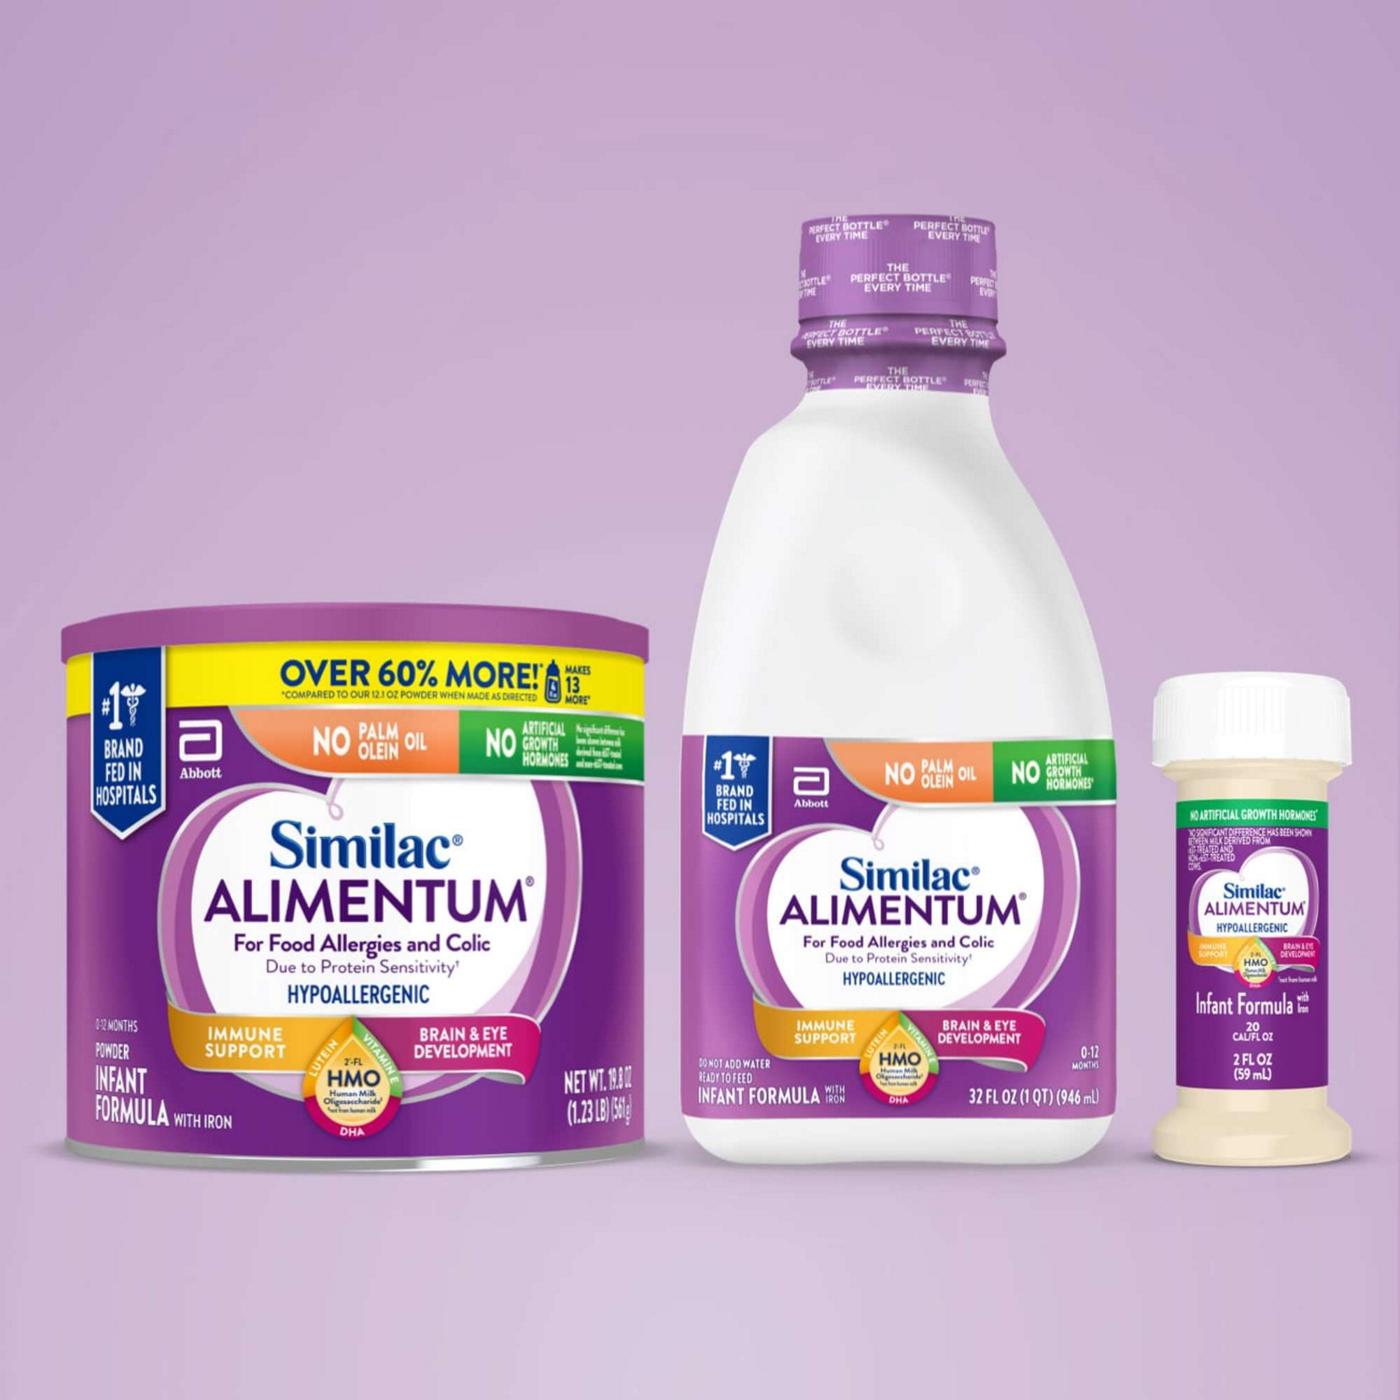 Similac Alimentum with 2’FL HMO, Ready-to-Feed Baby Formula, ; image 10 of 12